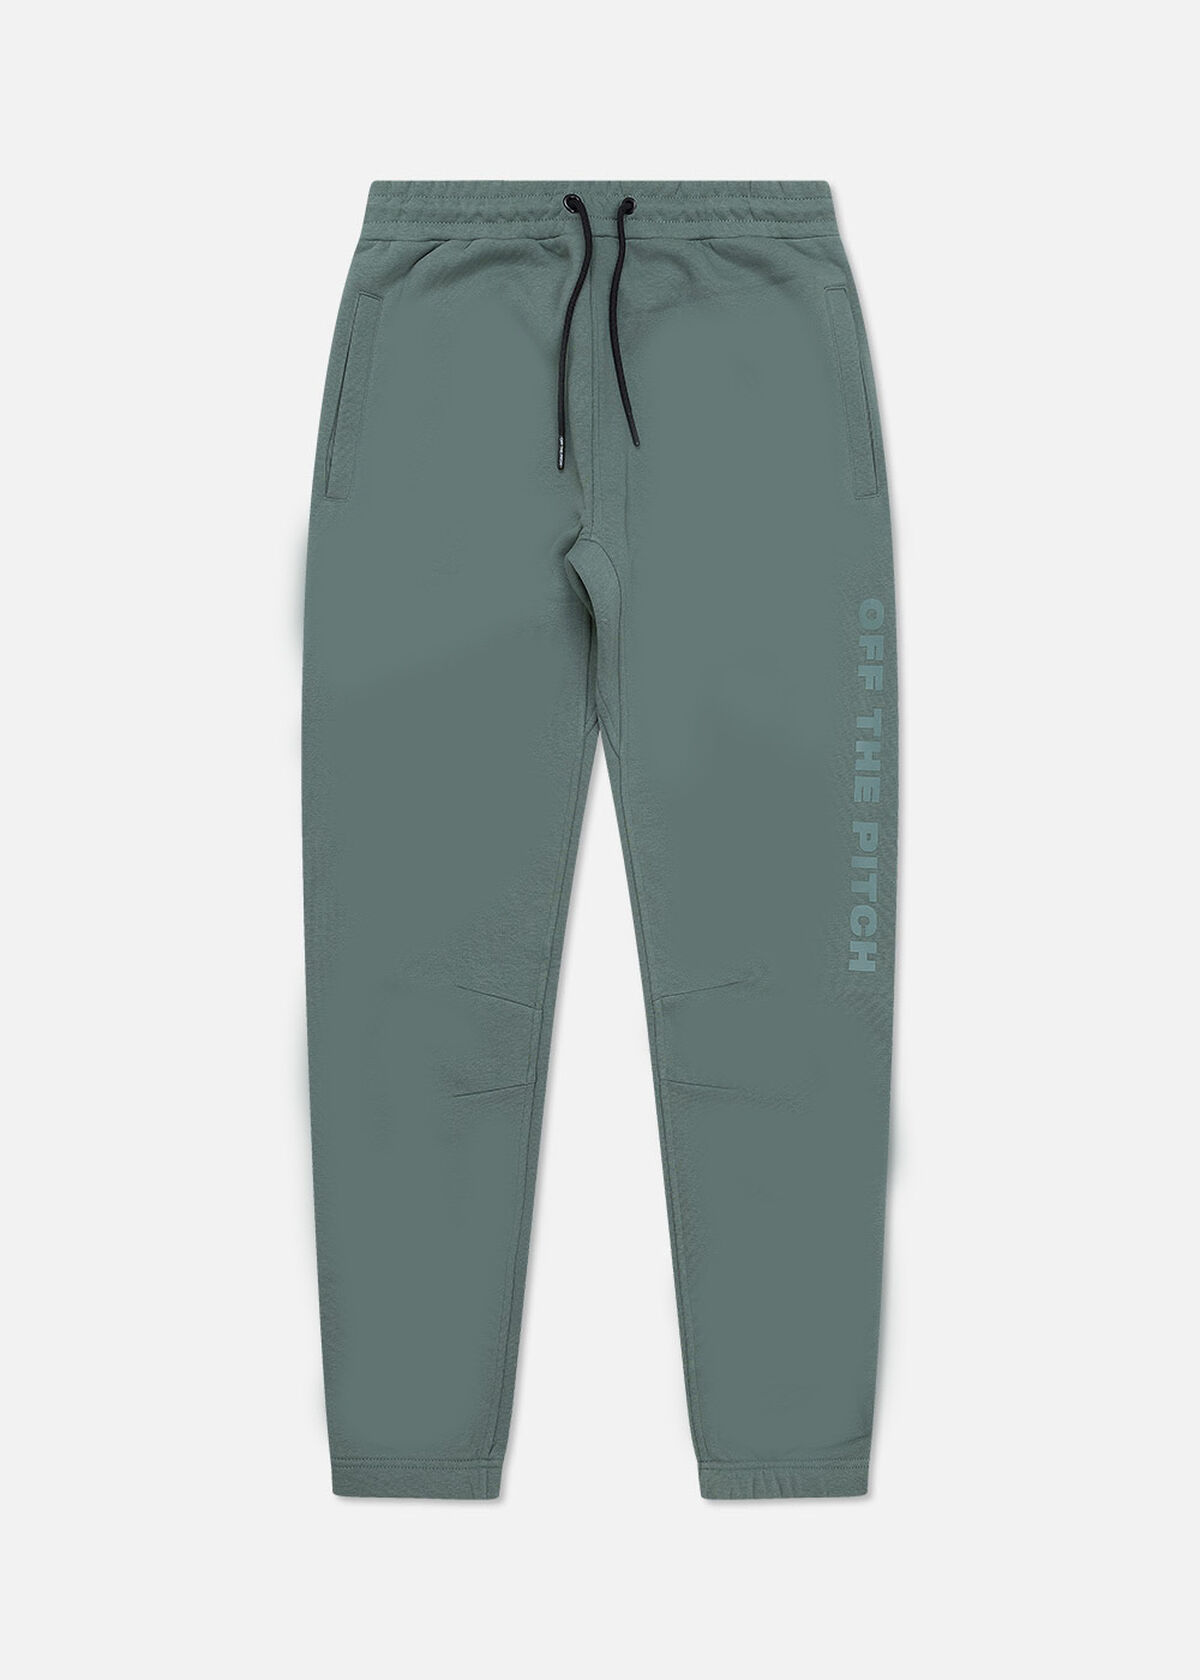 Comfort Pants - 65% Cotton / 35% Polyester, Forest Green, hi-res